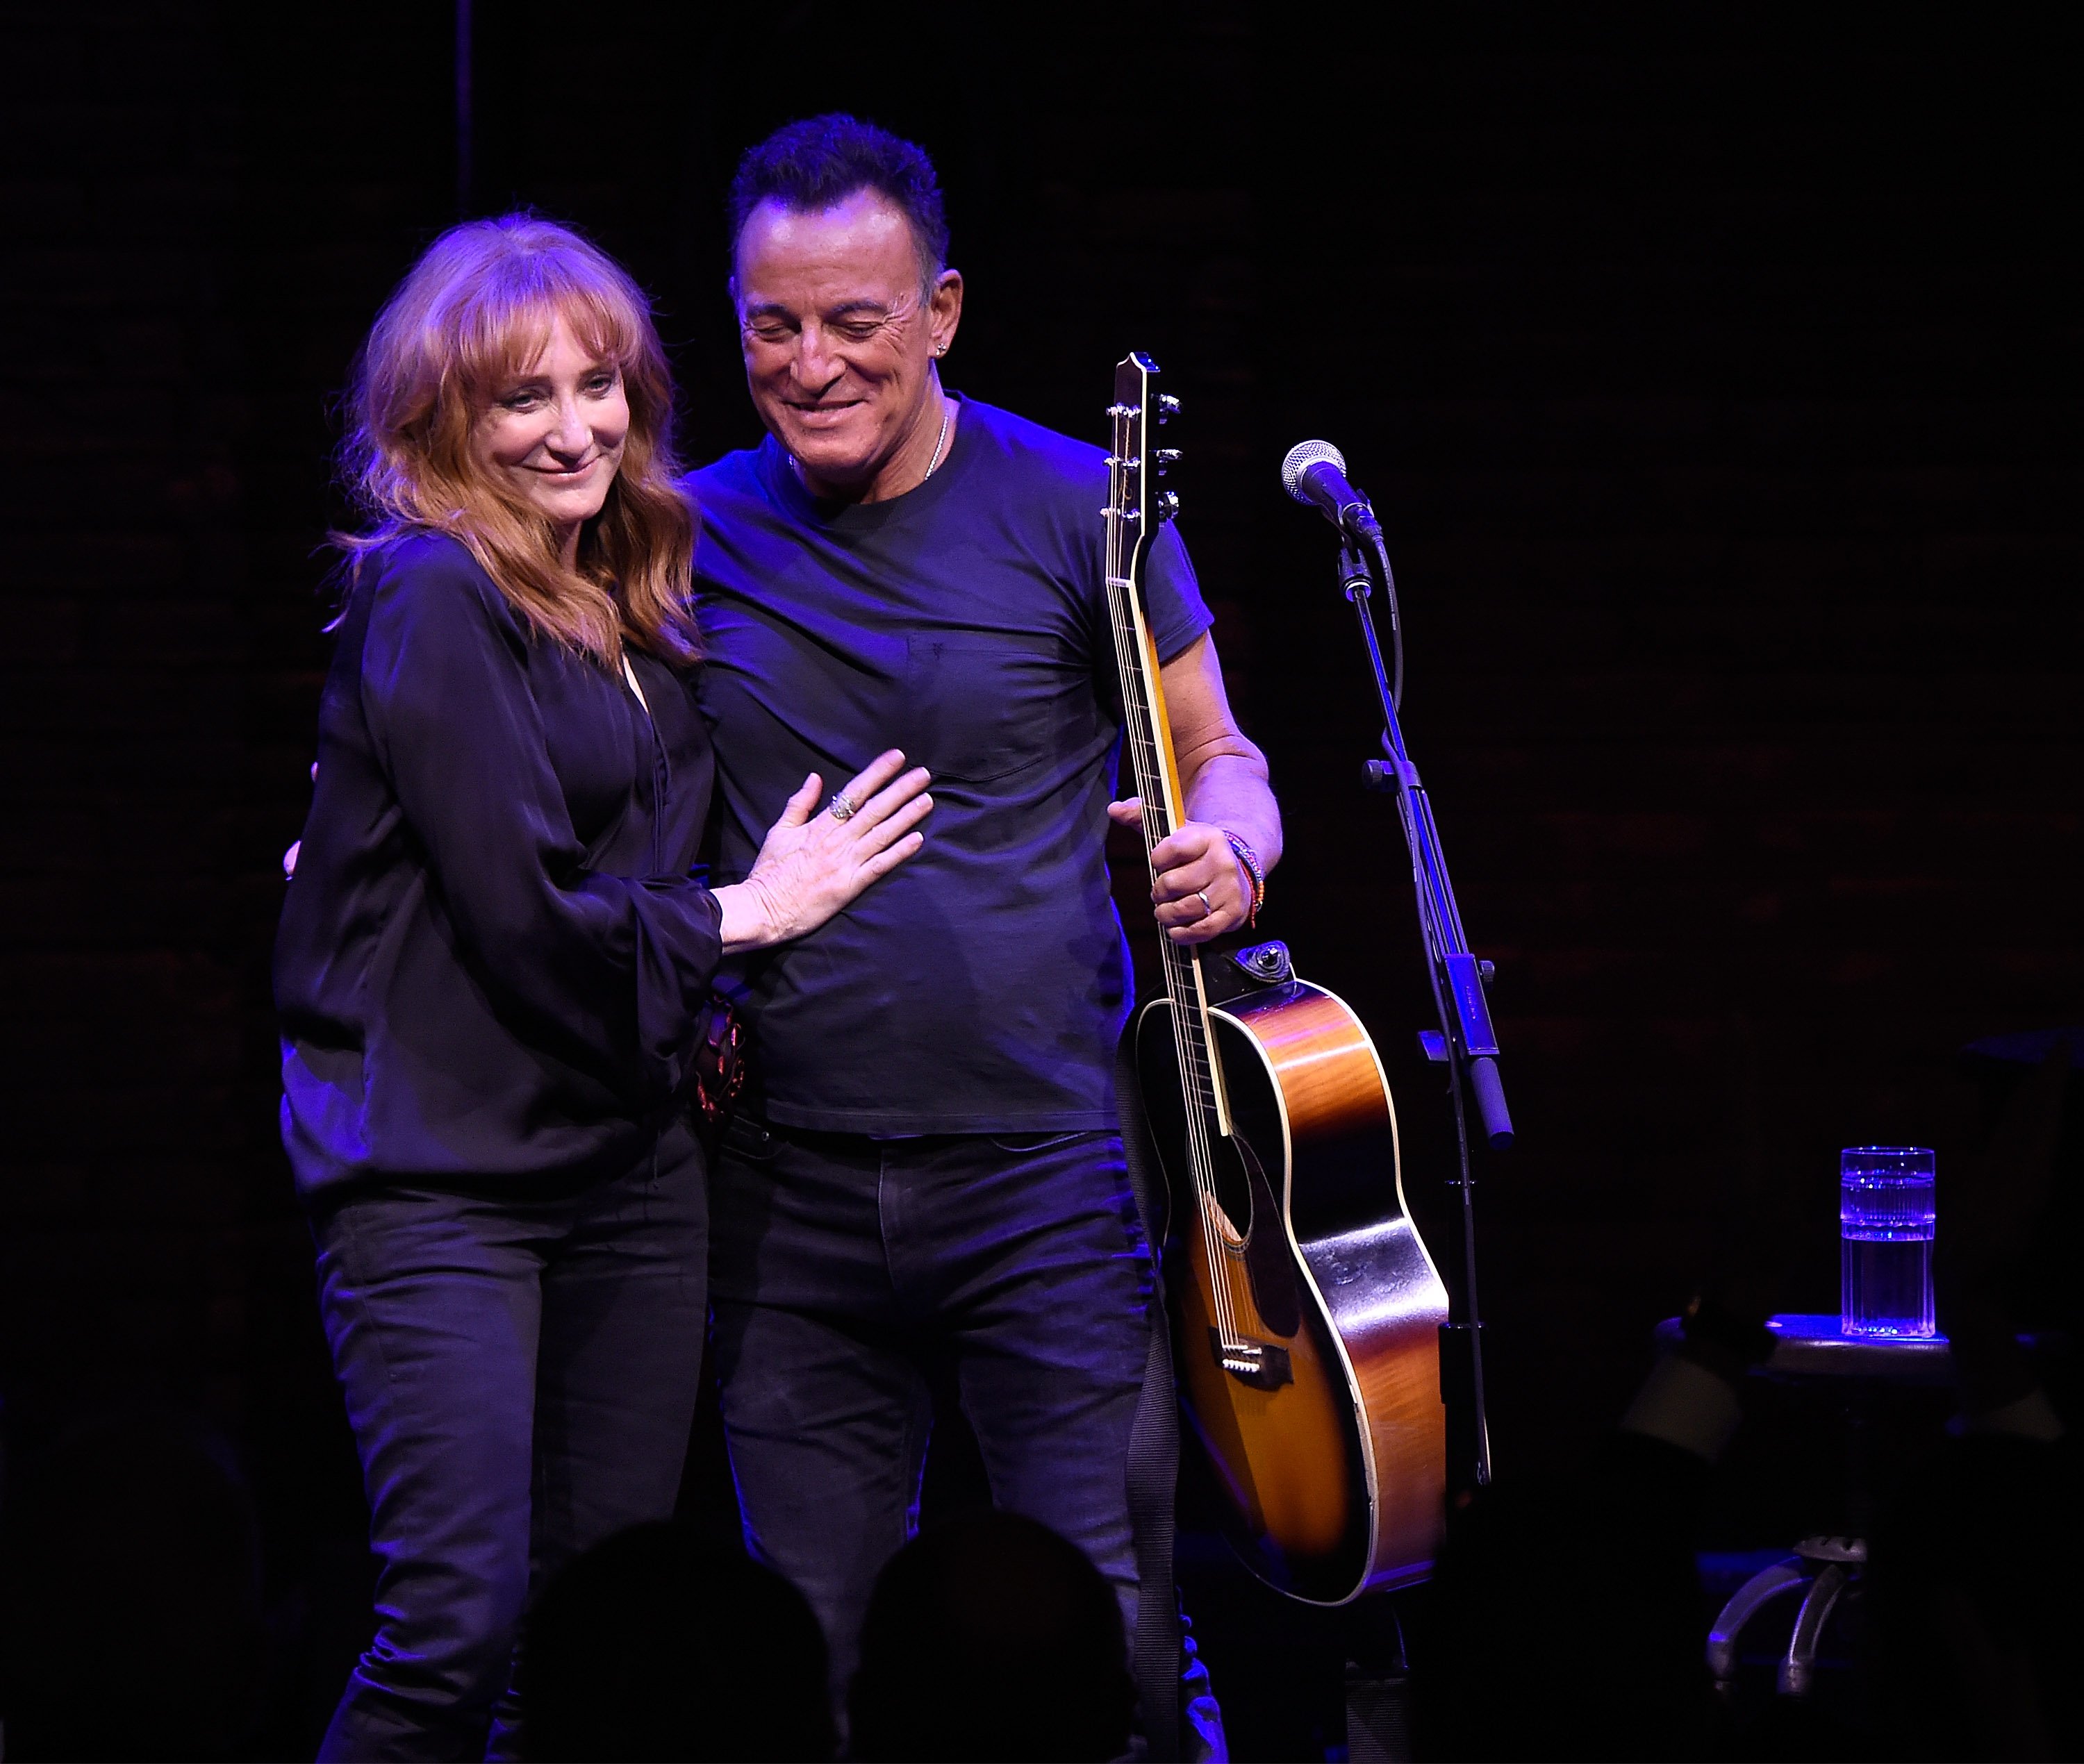 Bruce Springsteen and Patti Scialfa almost 30 years together. | Photo: Getty Images